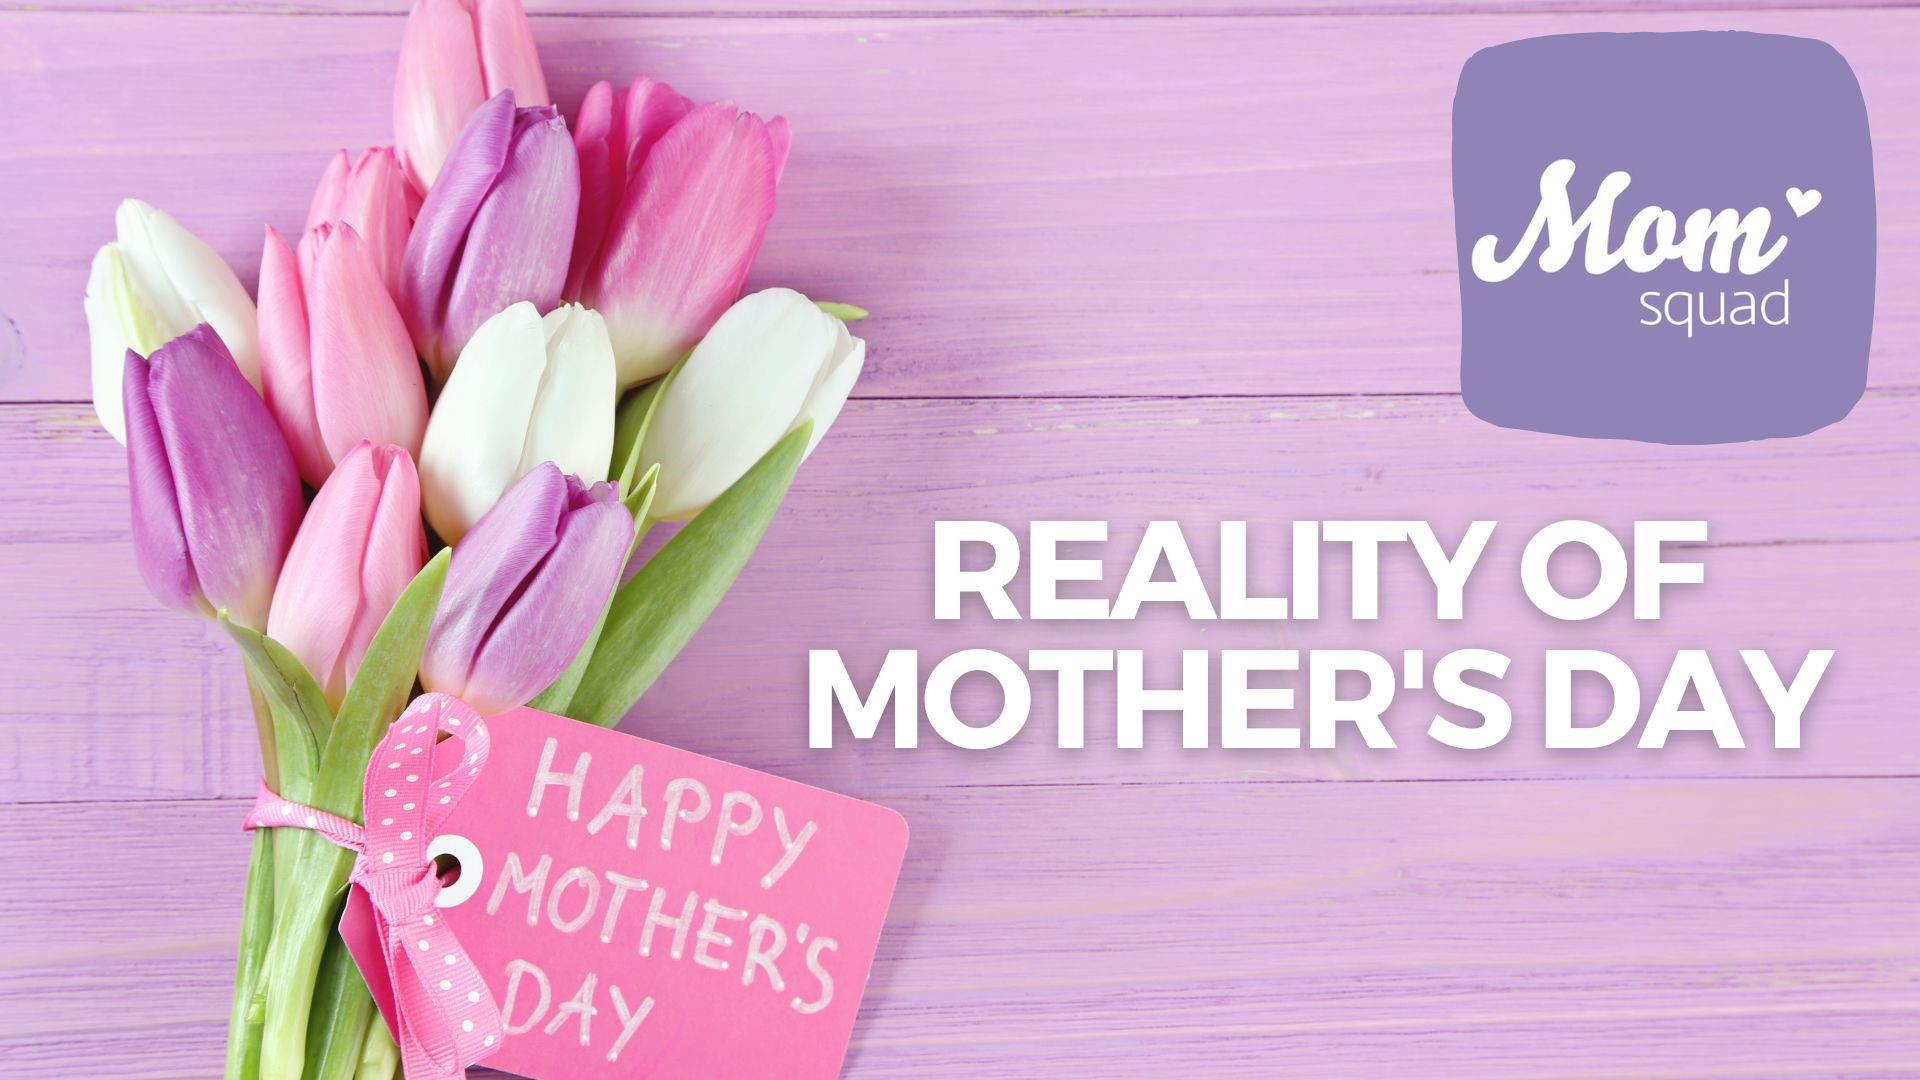 Maureen Kyle talks with a mom expert and life coach about how to approach Mother's Day and the importance of moms taking time for themselves throughout the year.